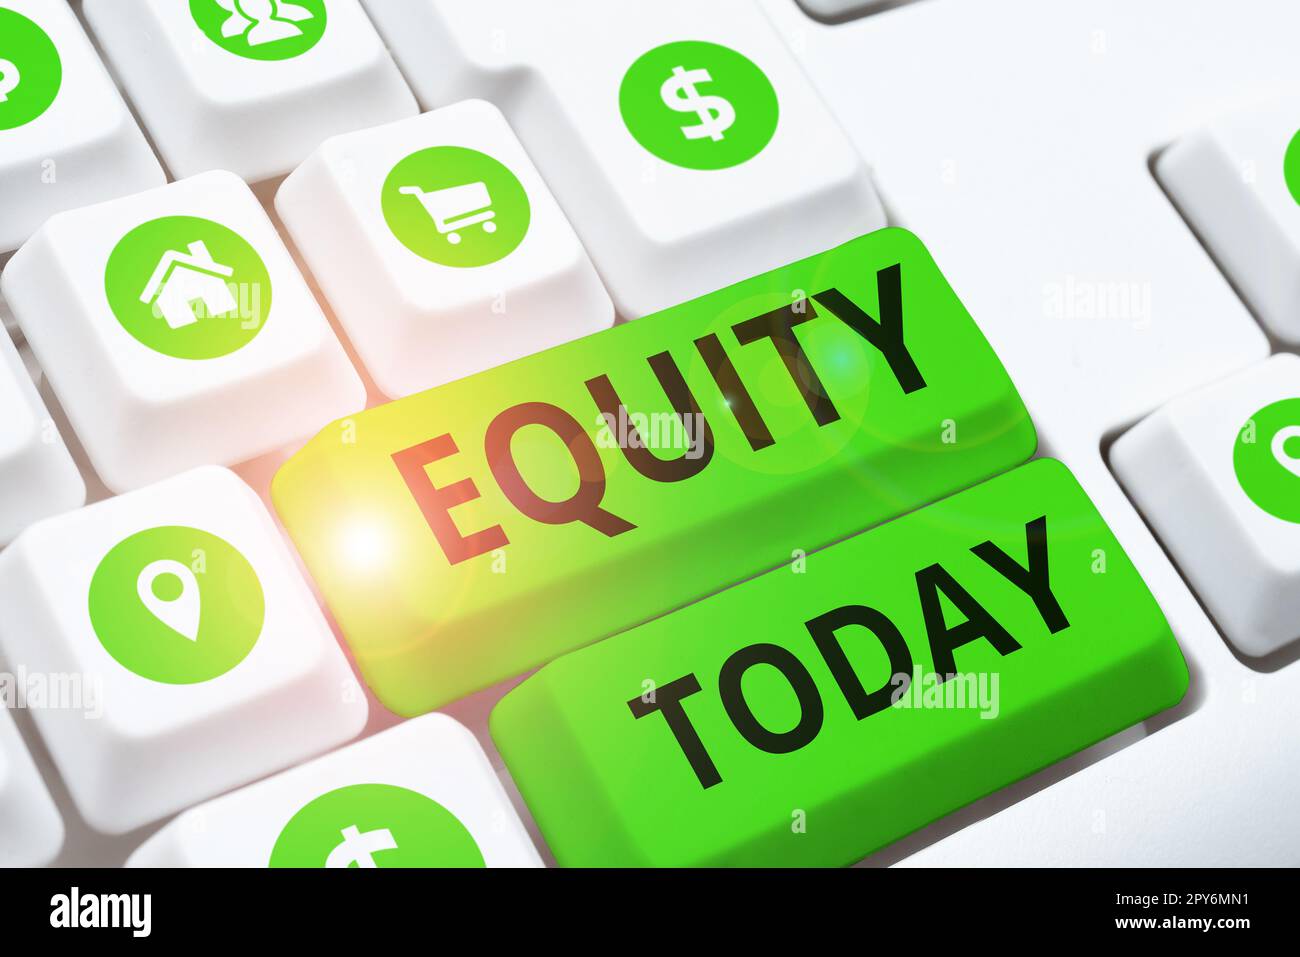 Sign displaying Equity. Business overview quality of being fair and impartial race free One hand Unity Stock Photo